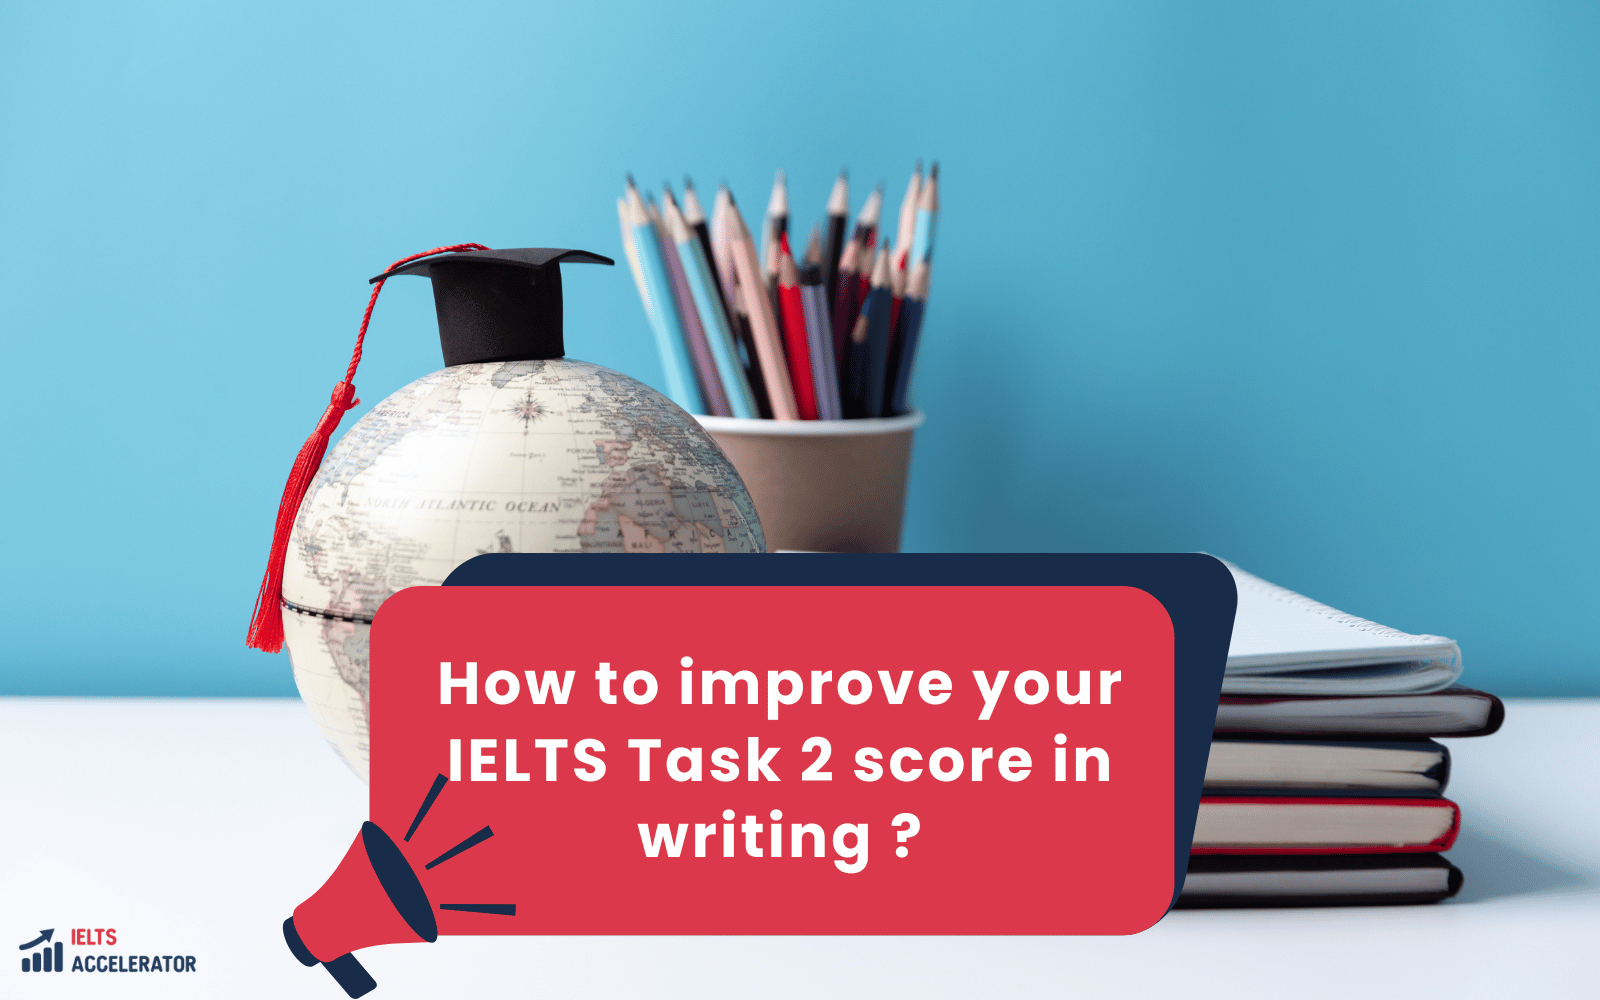 How to improve your IELTS Task 2 score in writing